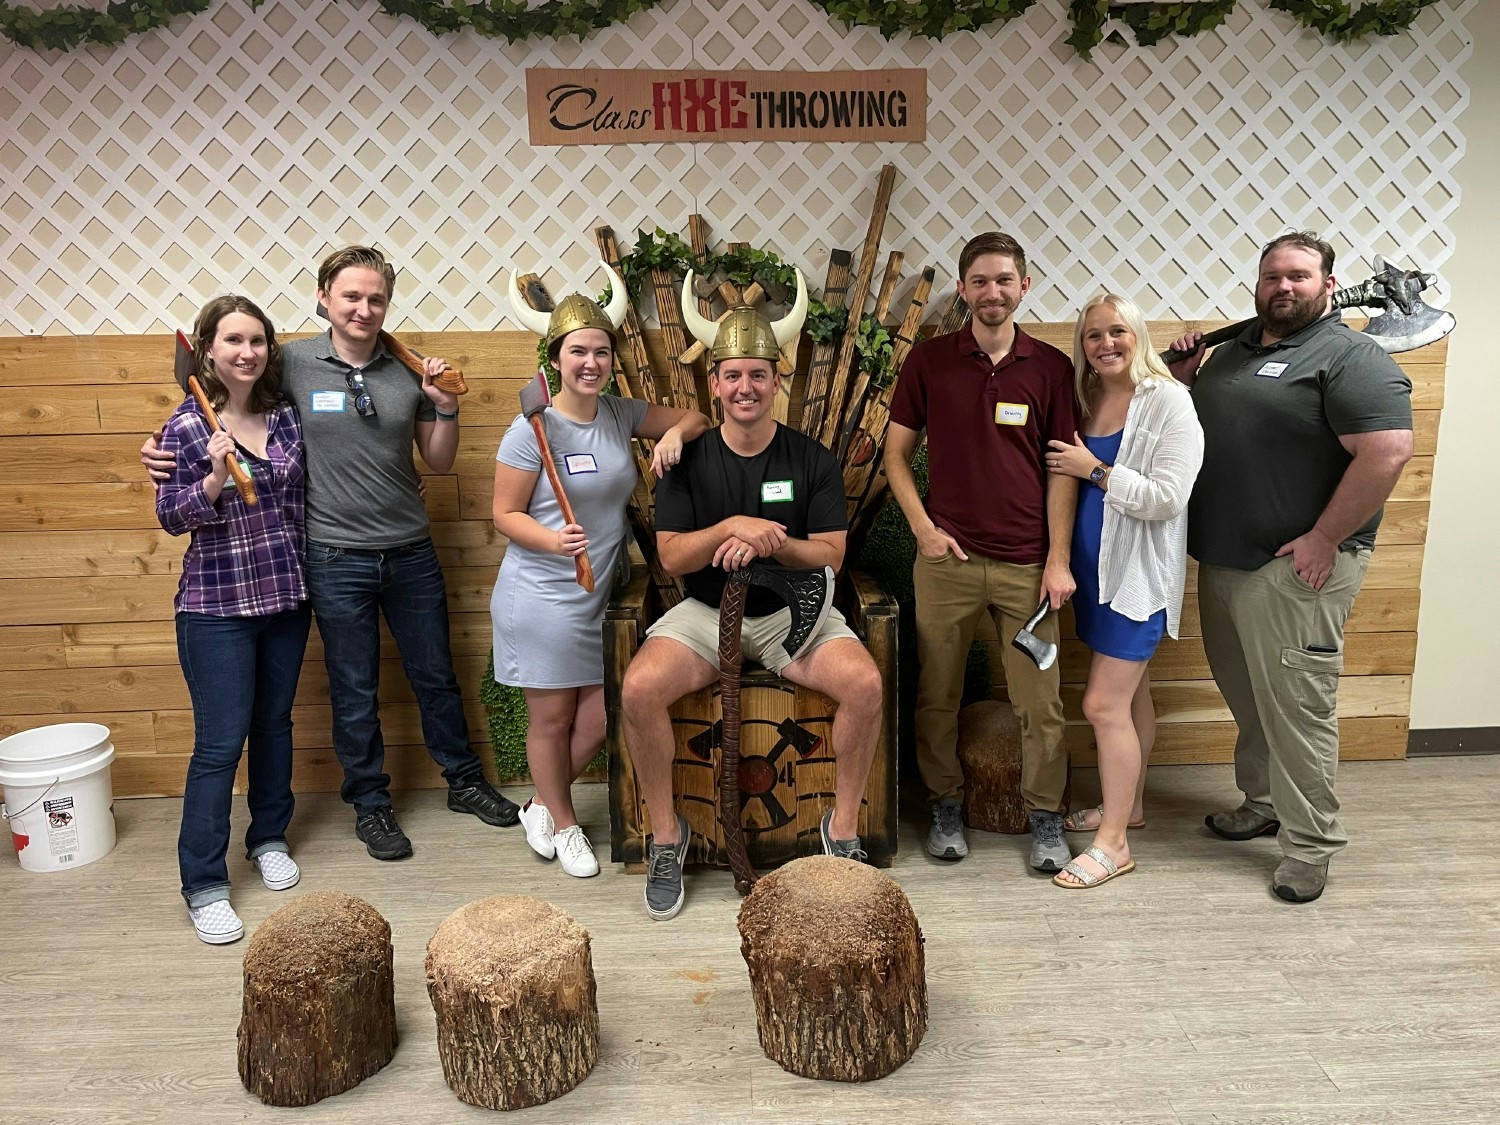 Our Dallas Team enjoyed a night of axe throwing together. Families were encouraged to join in on the fun. 